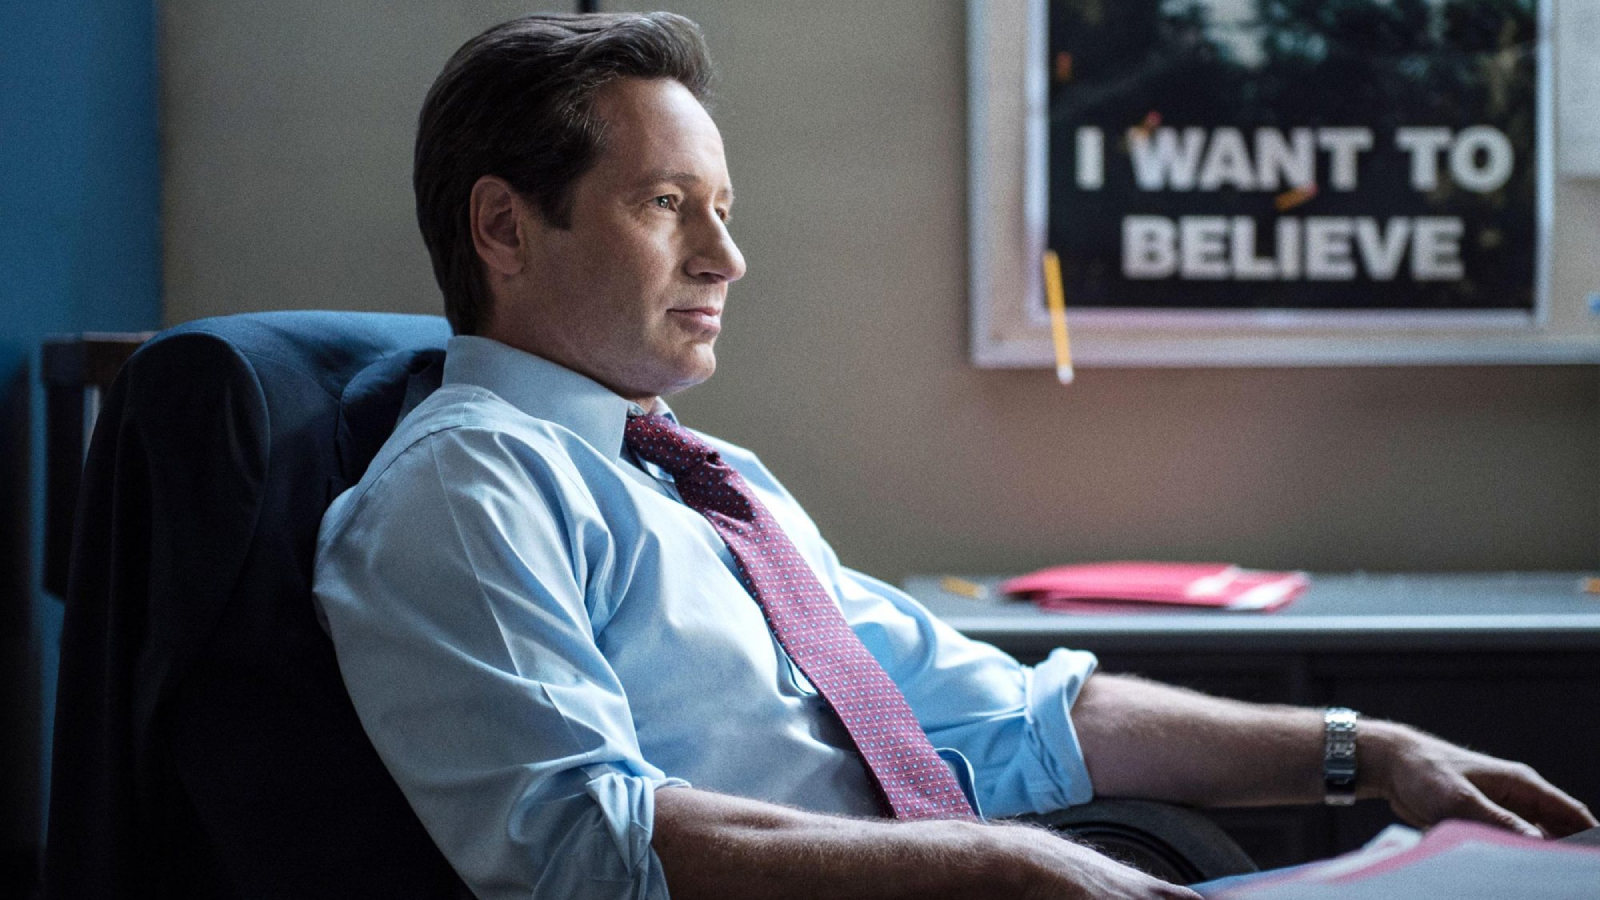 David Duchovny Joins the Picket Line With X-Files-Themed Sign